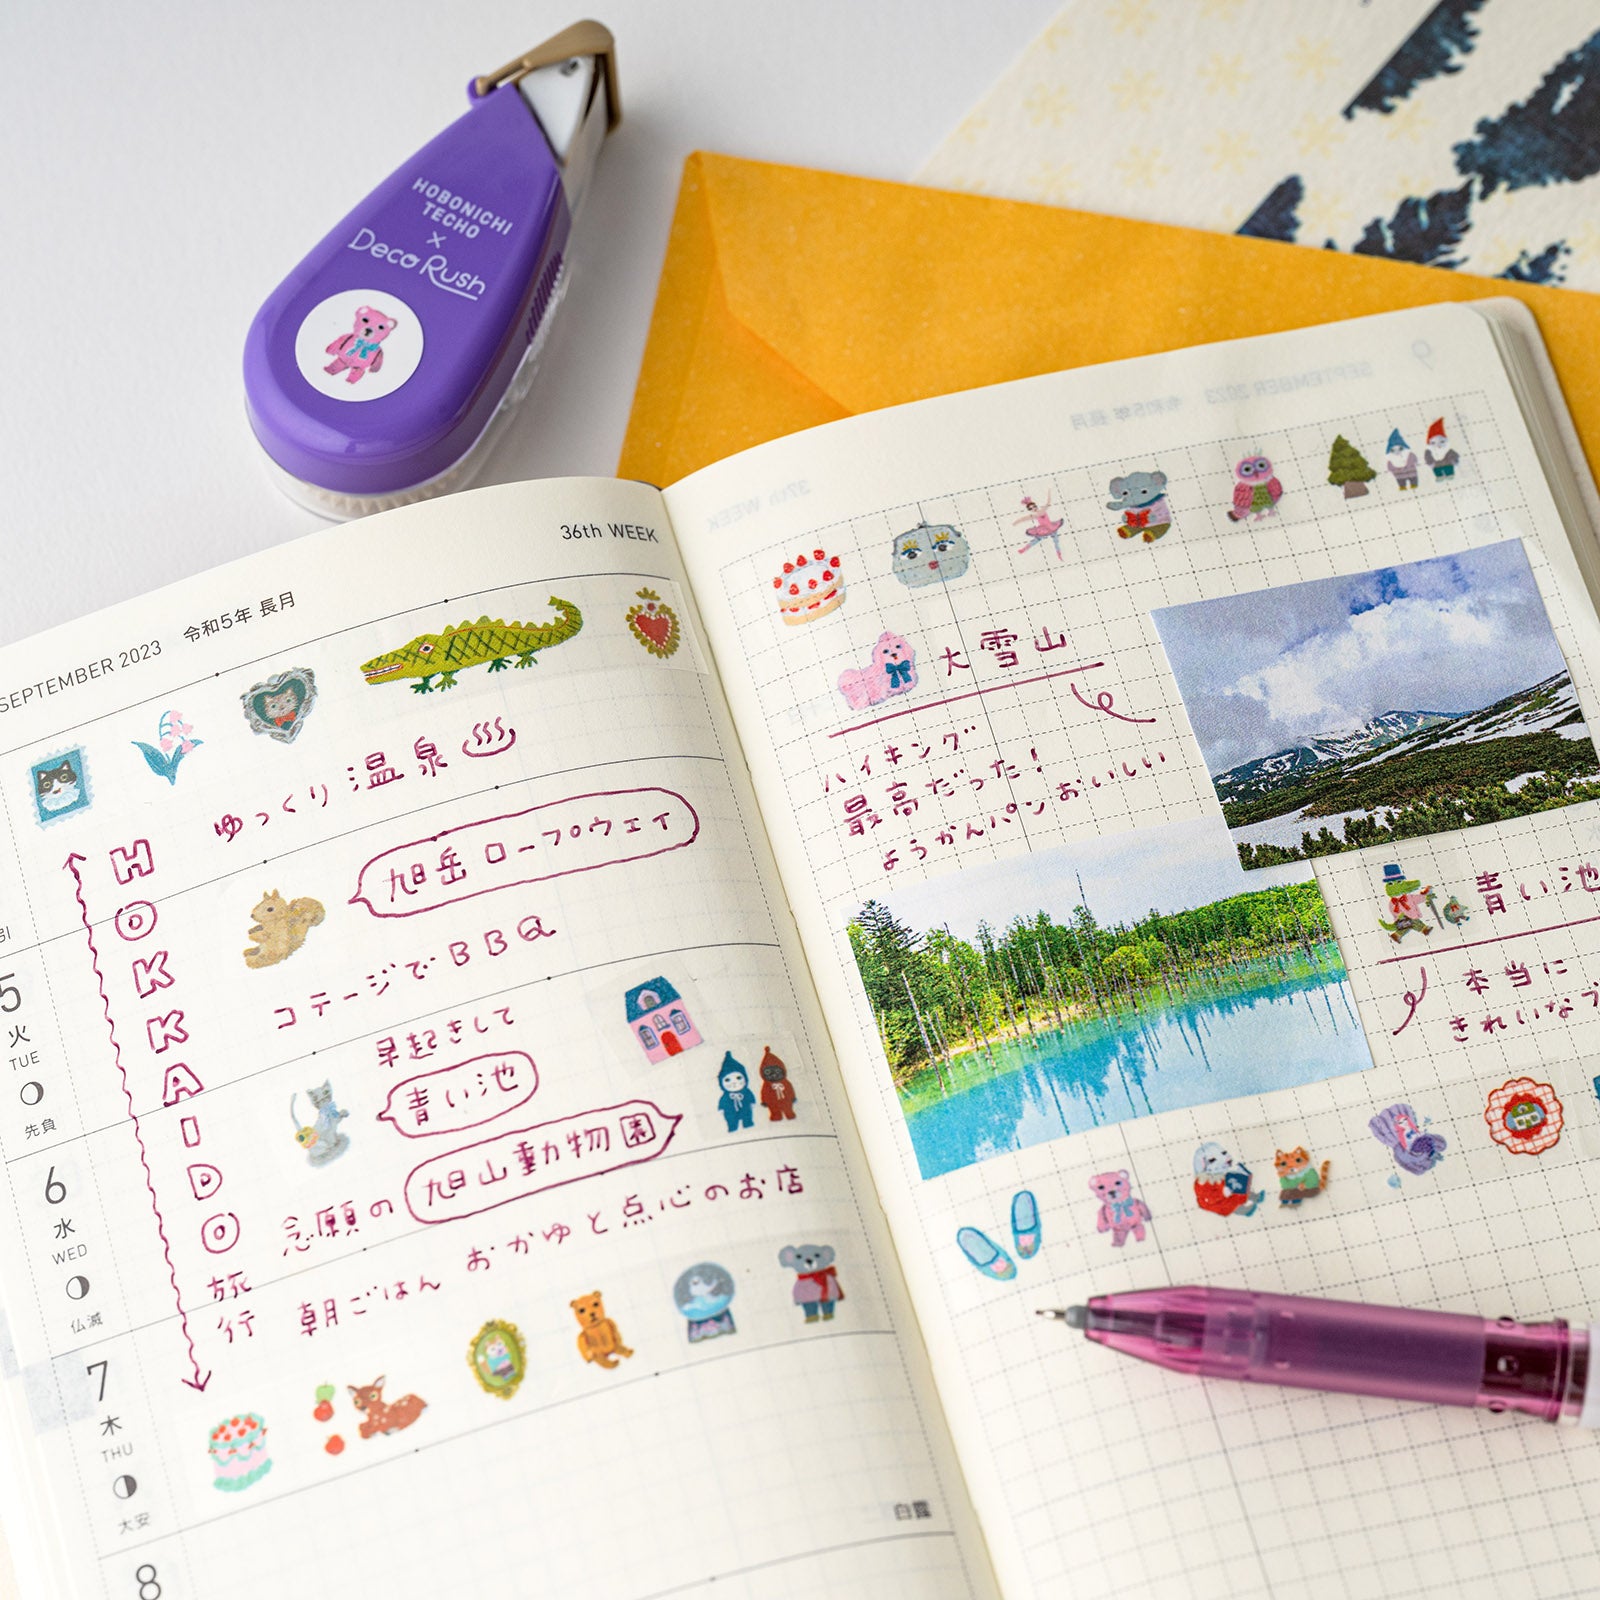 Hobonichi x Plus : Little Gifts by Yumi Kitagishi This Deco Rush is an original for the Hobonichi Techo featuring illustrations from Yumi Kitagishi’s techo cover.  Deco Rush is a decorative tape that works like a correction tape and provides an easy way to spruce up your techo pages with a cute look.